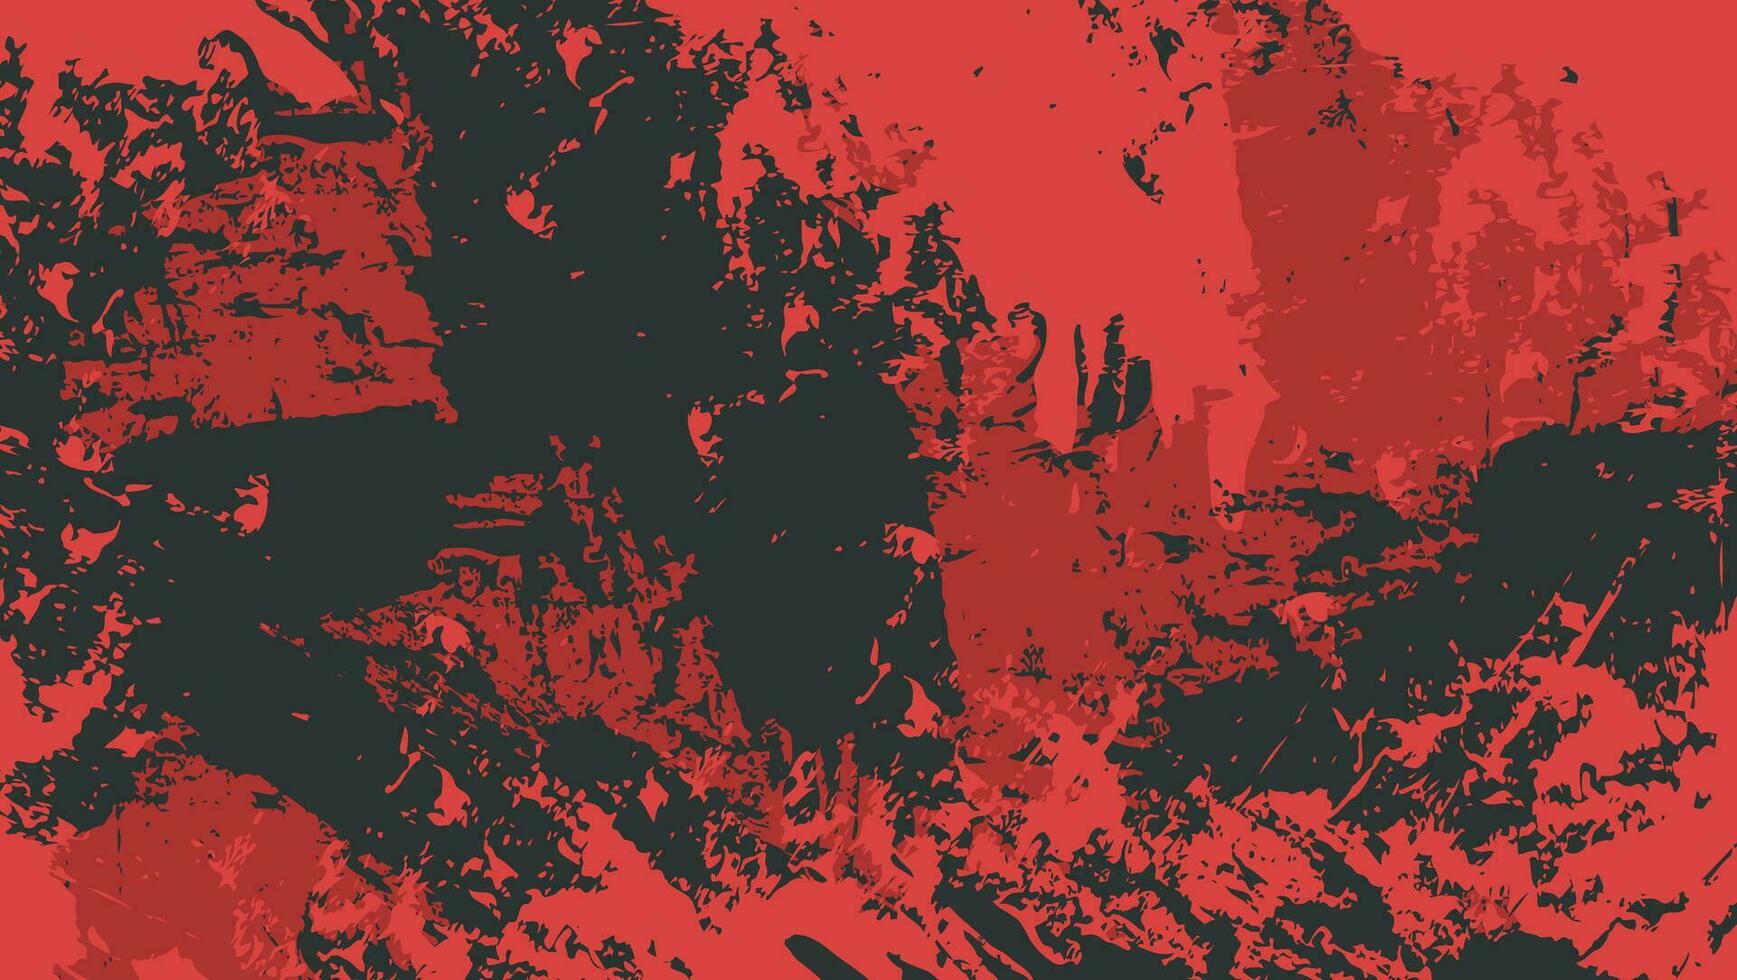 Abstract Bright Red Grunge Texture In Black Background vector